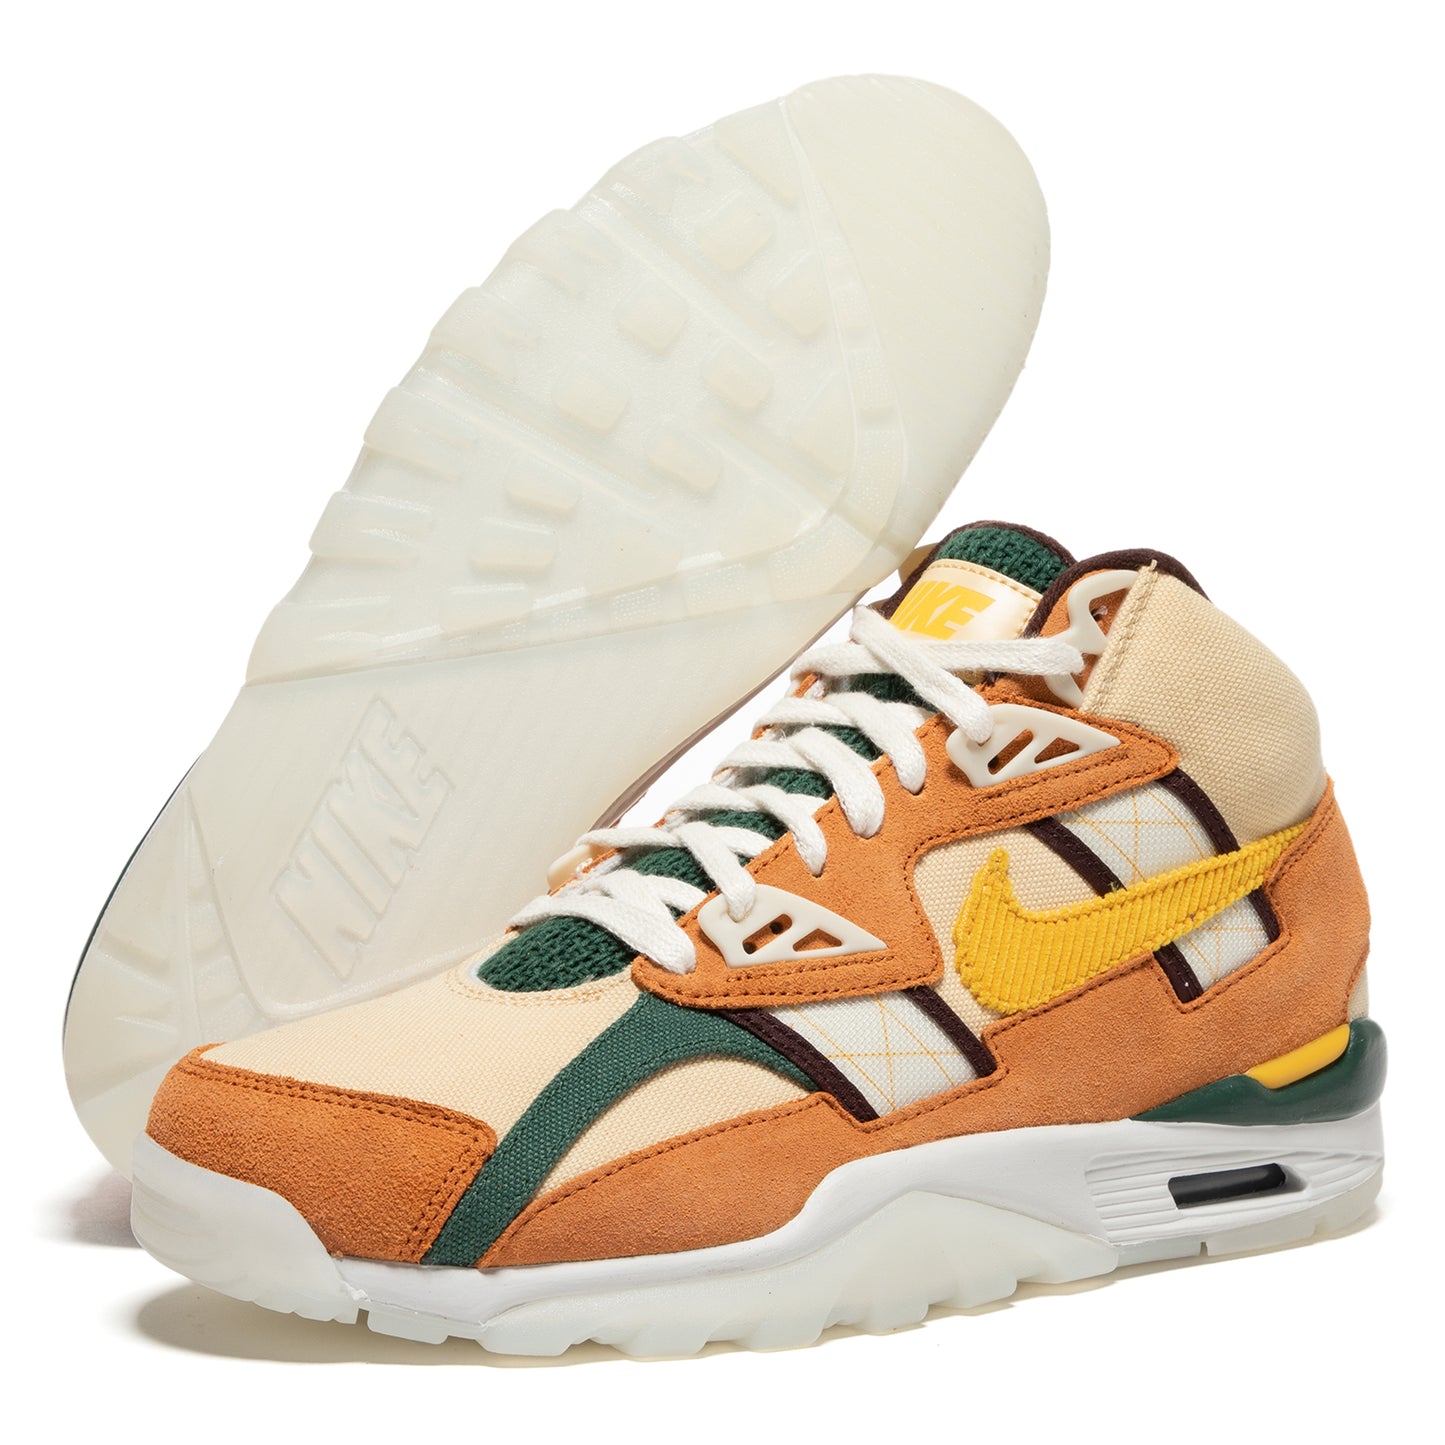 Nike Air Trainer SC High (Canvas/Pollen/Cider/Noble Green)